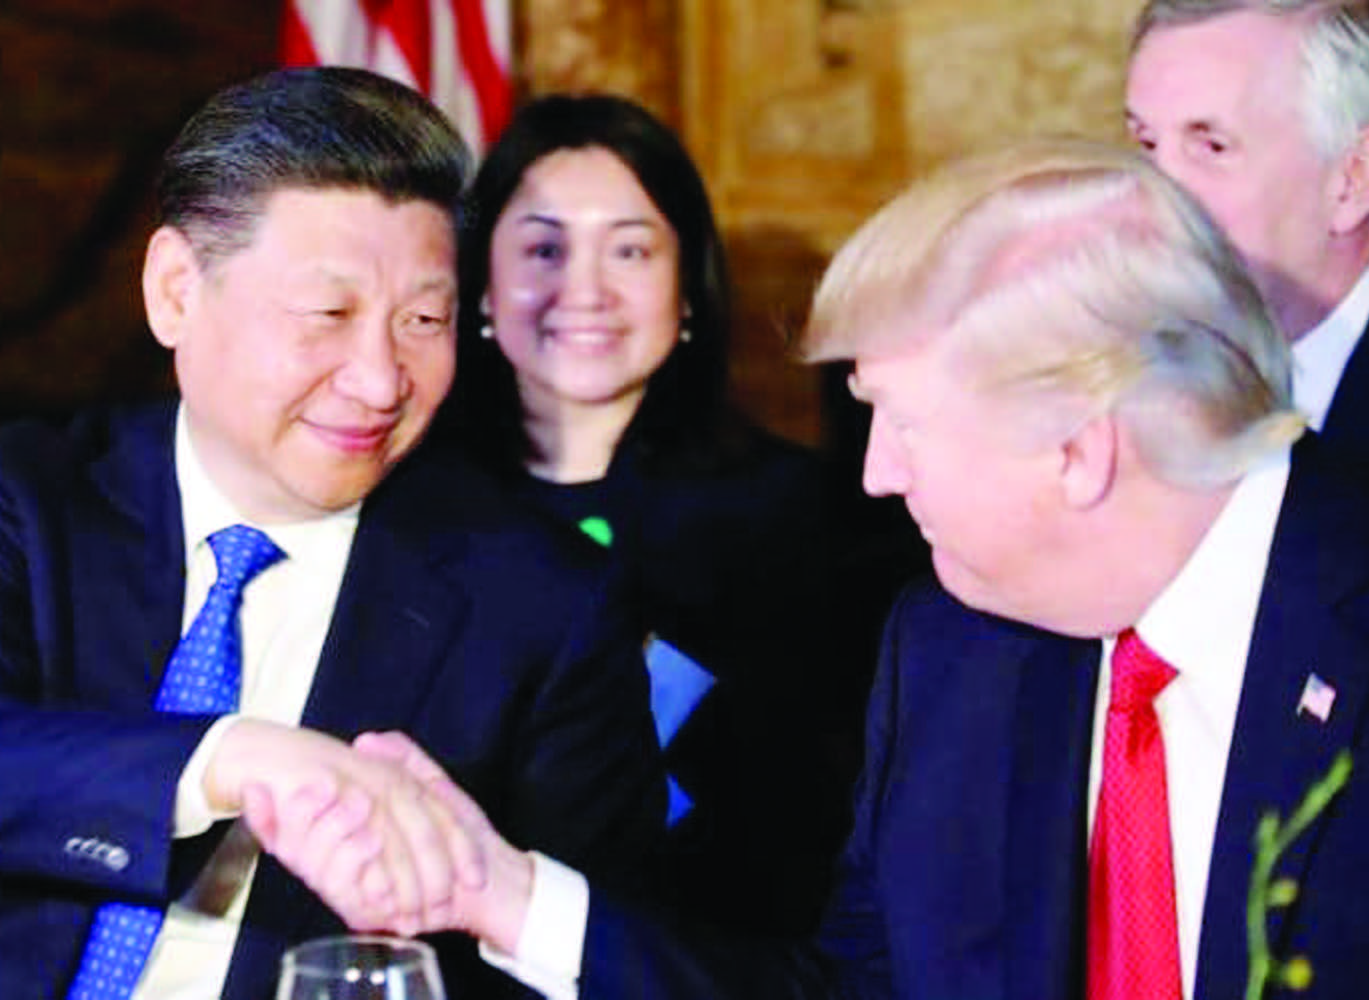 President Donald Trump and Chinese President Xi Jinping shake hands during a dinner at Mar-a-Lago